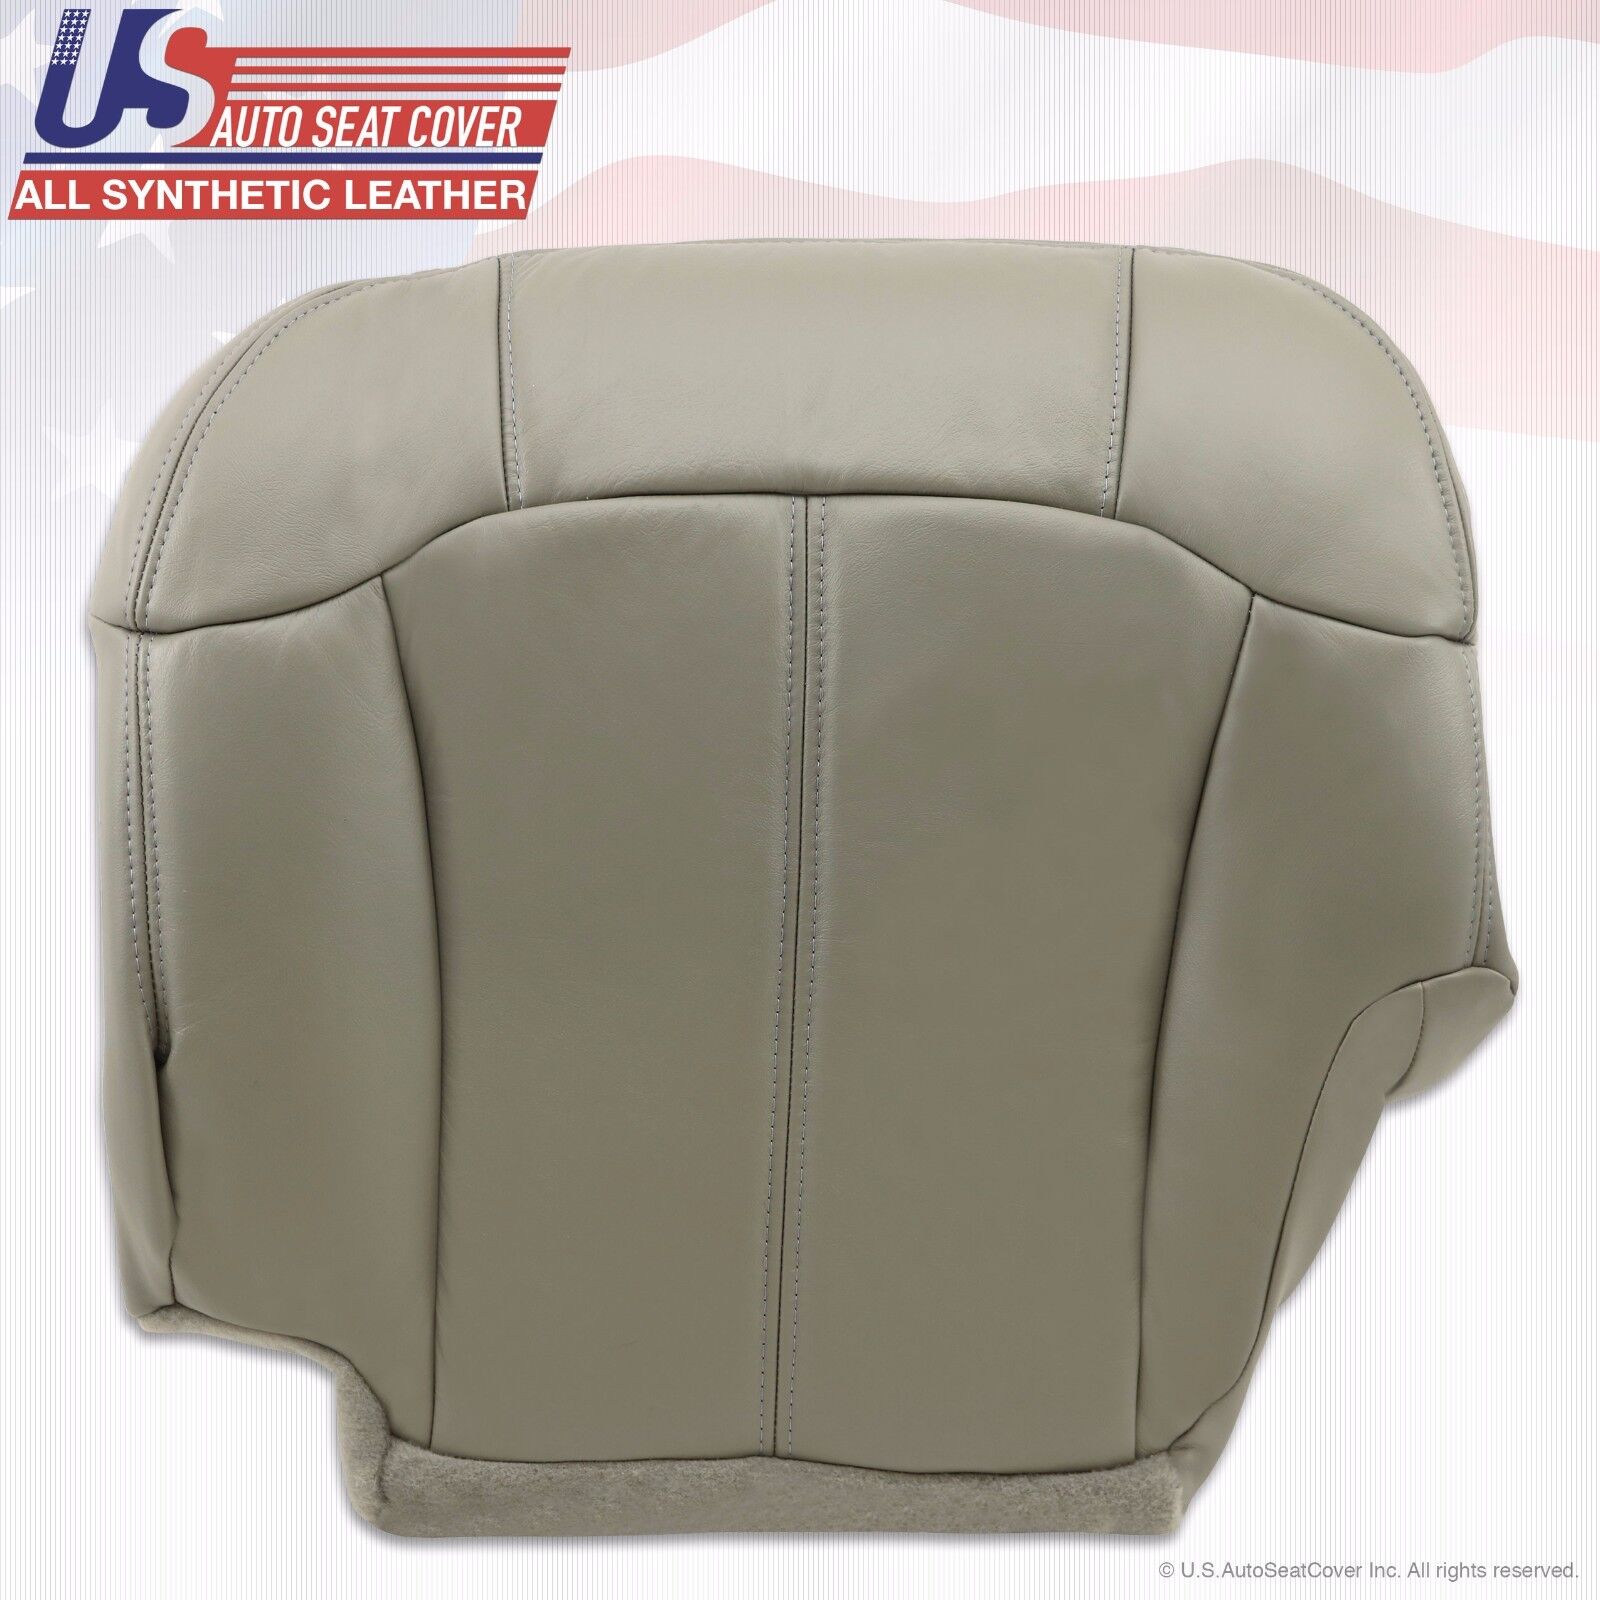 1999 2000 2001 2002 Chevy Tahoe Suburban Synthetic leather seat cover Gray 